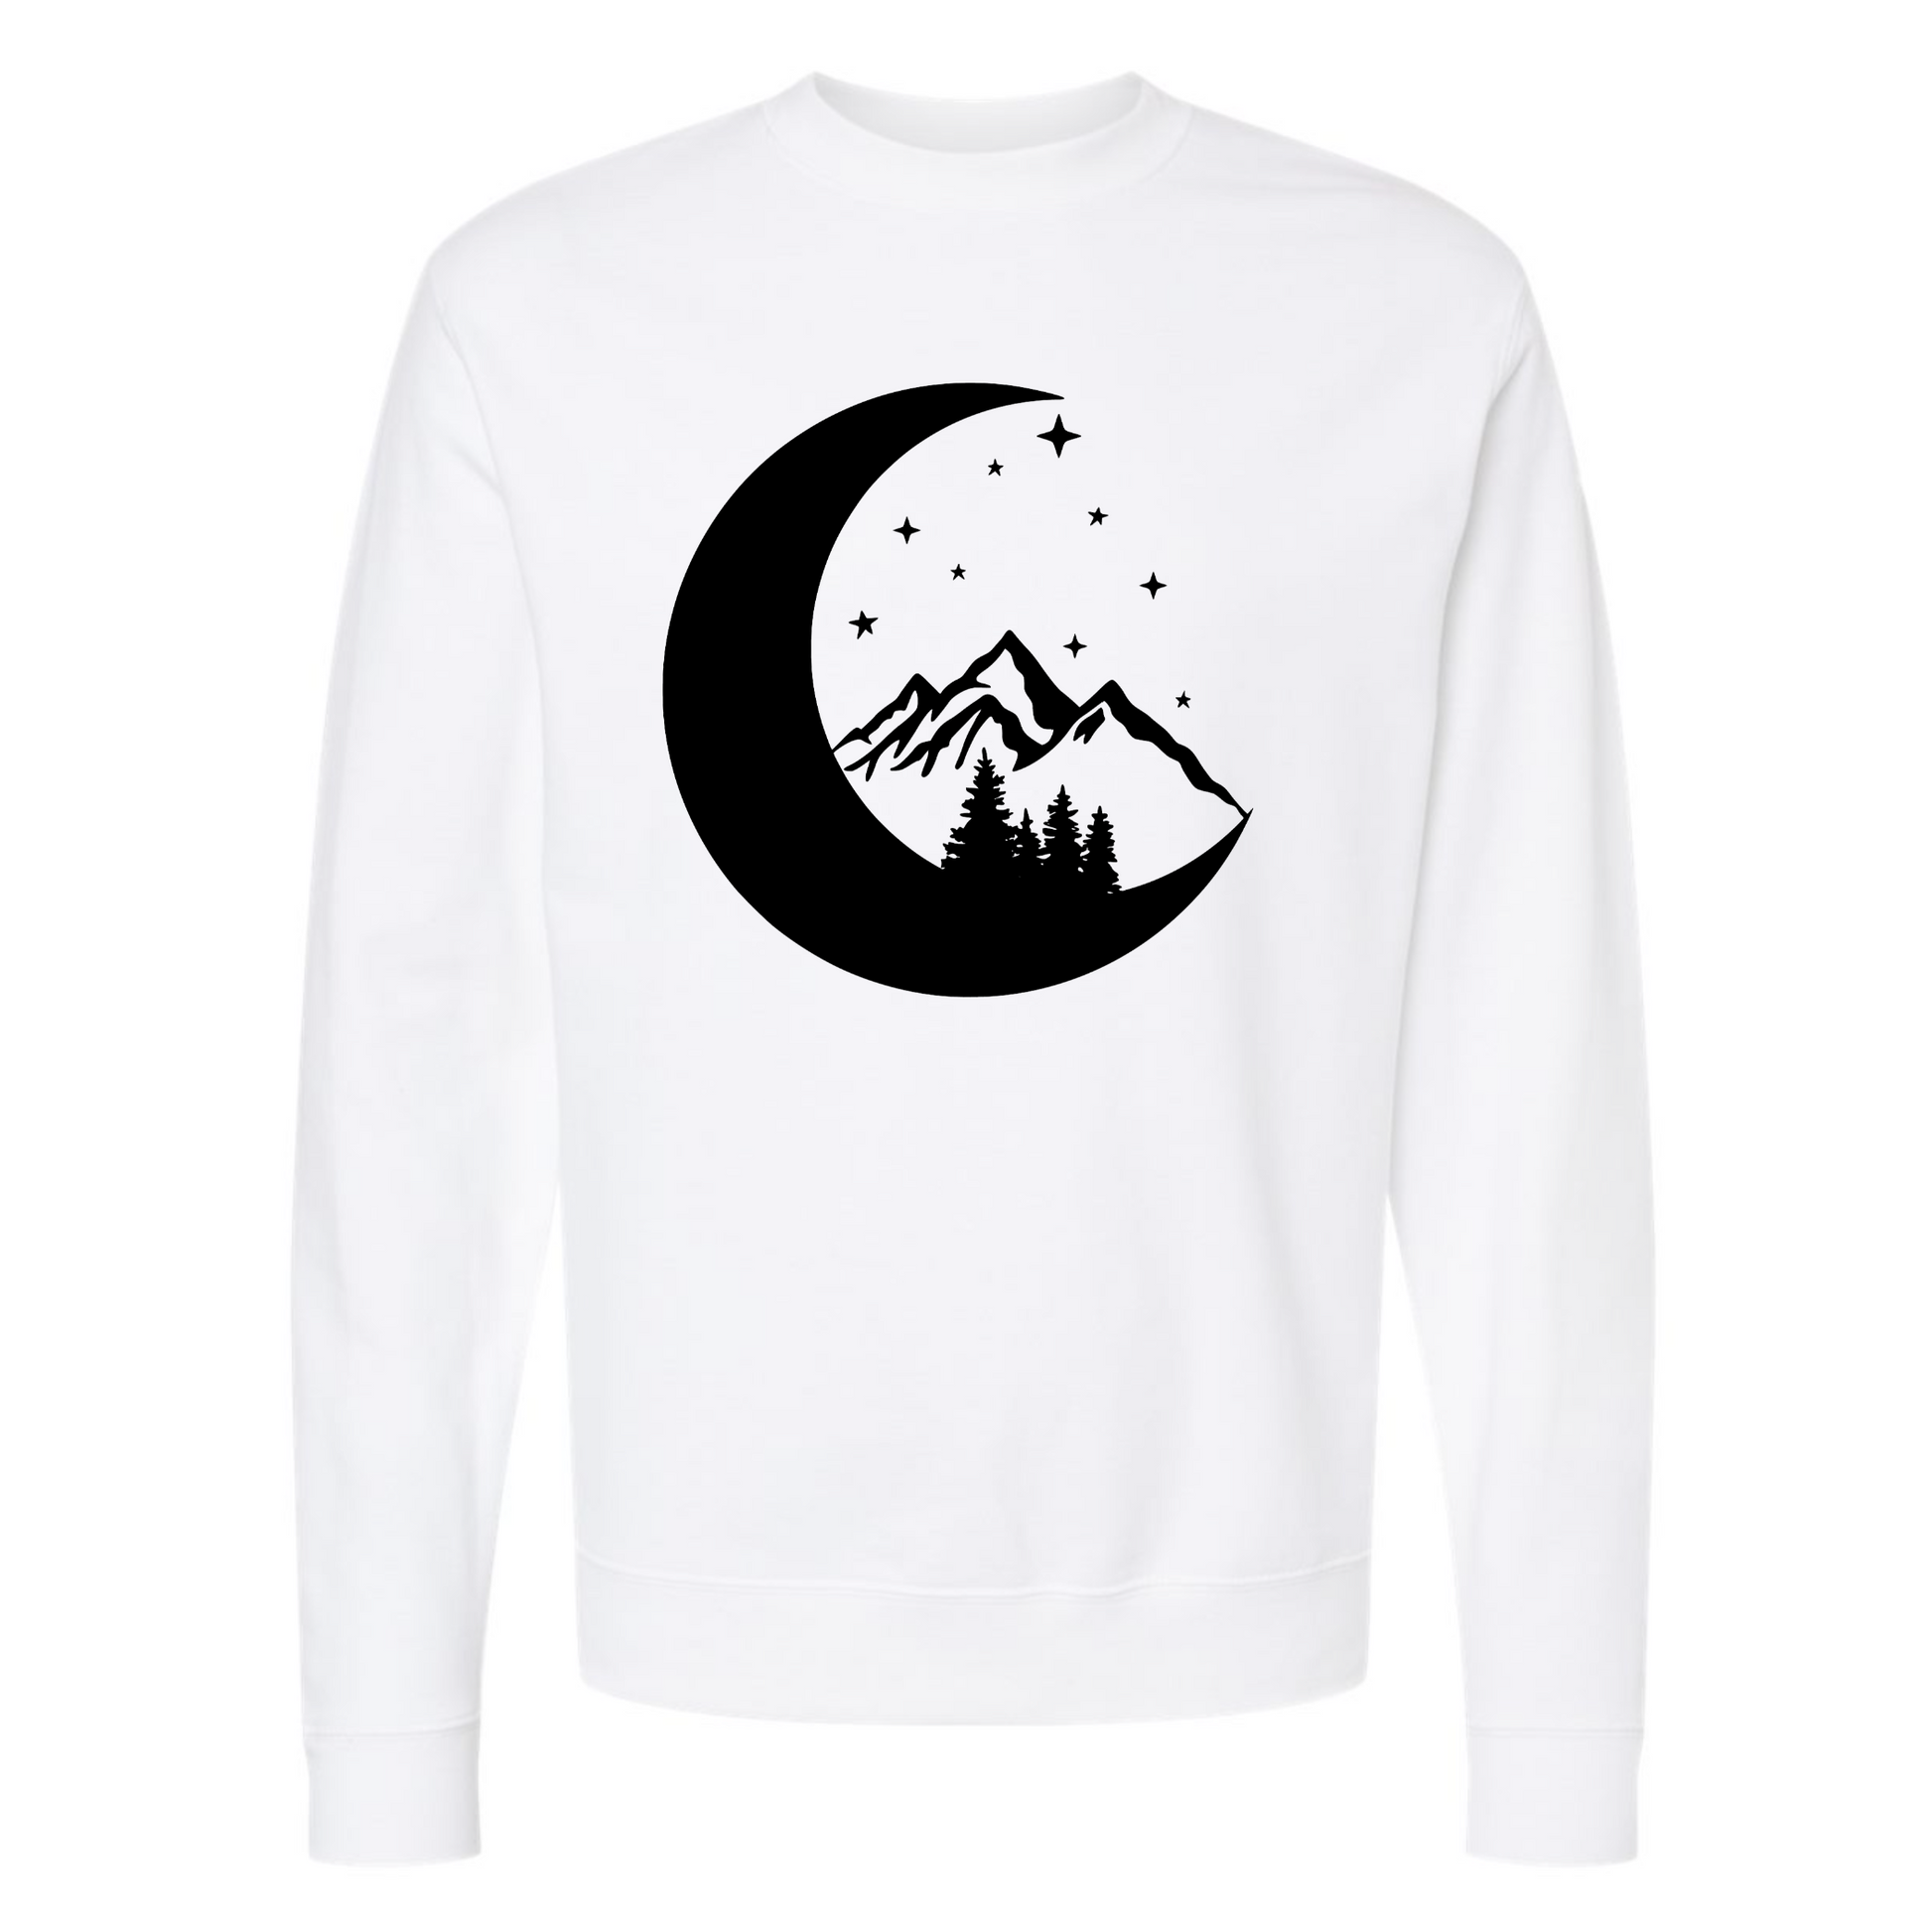 Moonlight Mountain - Pull Over Sweatshirt. The design is in black with a half moon, pine trees mountains and stars sitting inside the moon. This the front view of the sweatshirt on white.